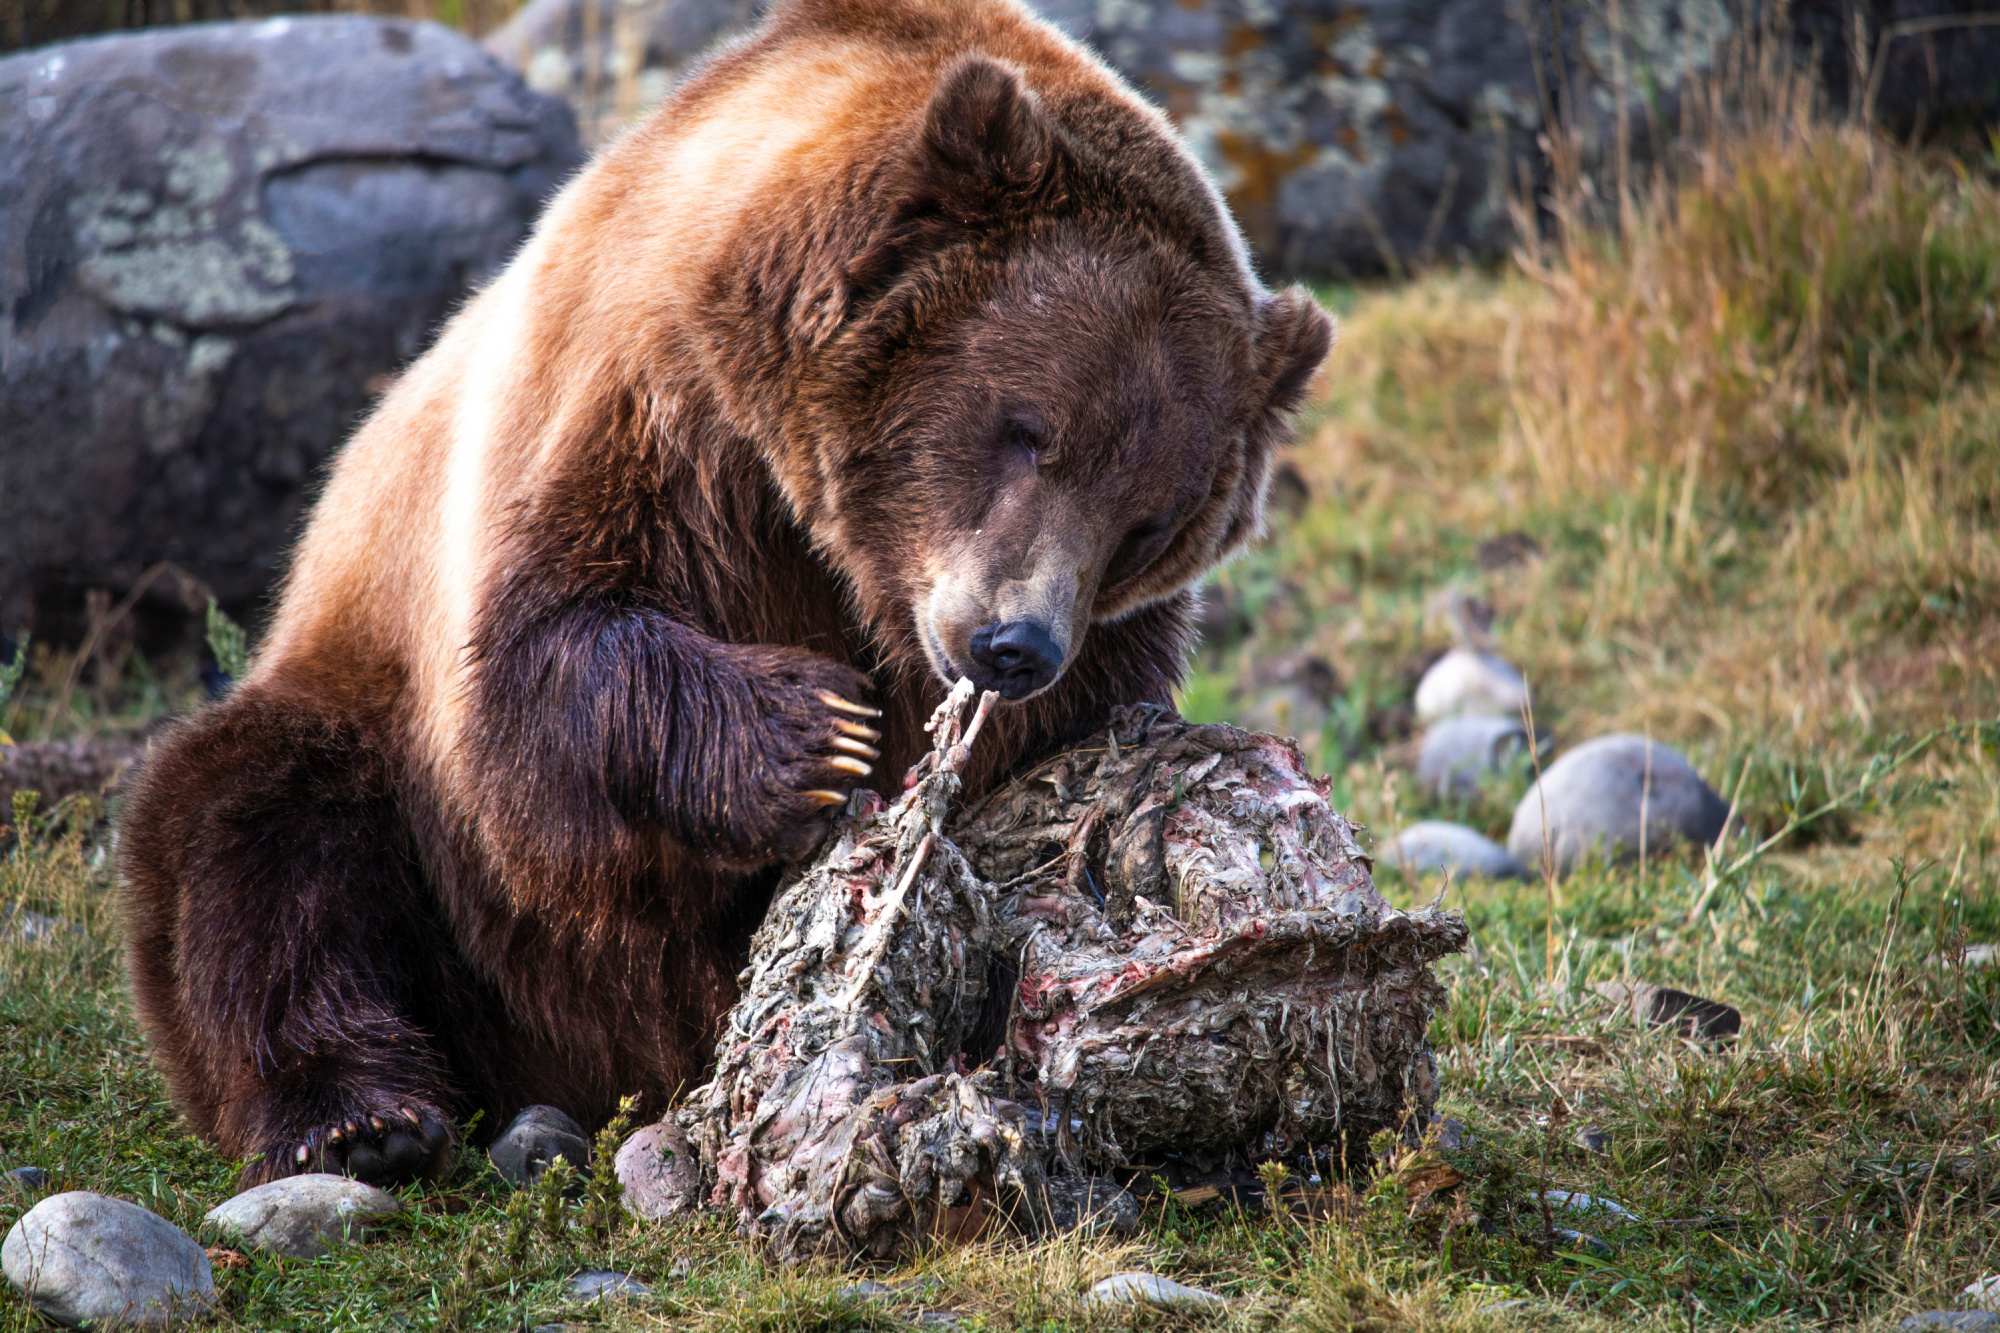 What You Need to Know About Eating Bear Meat